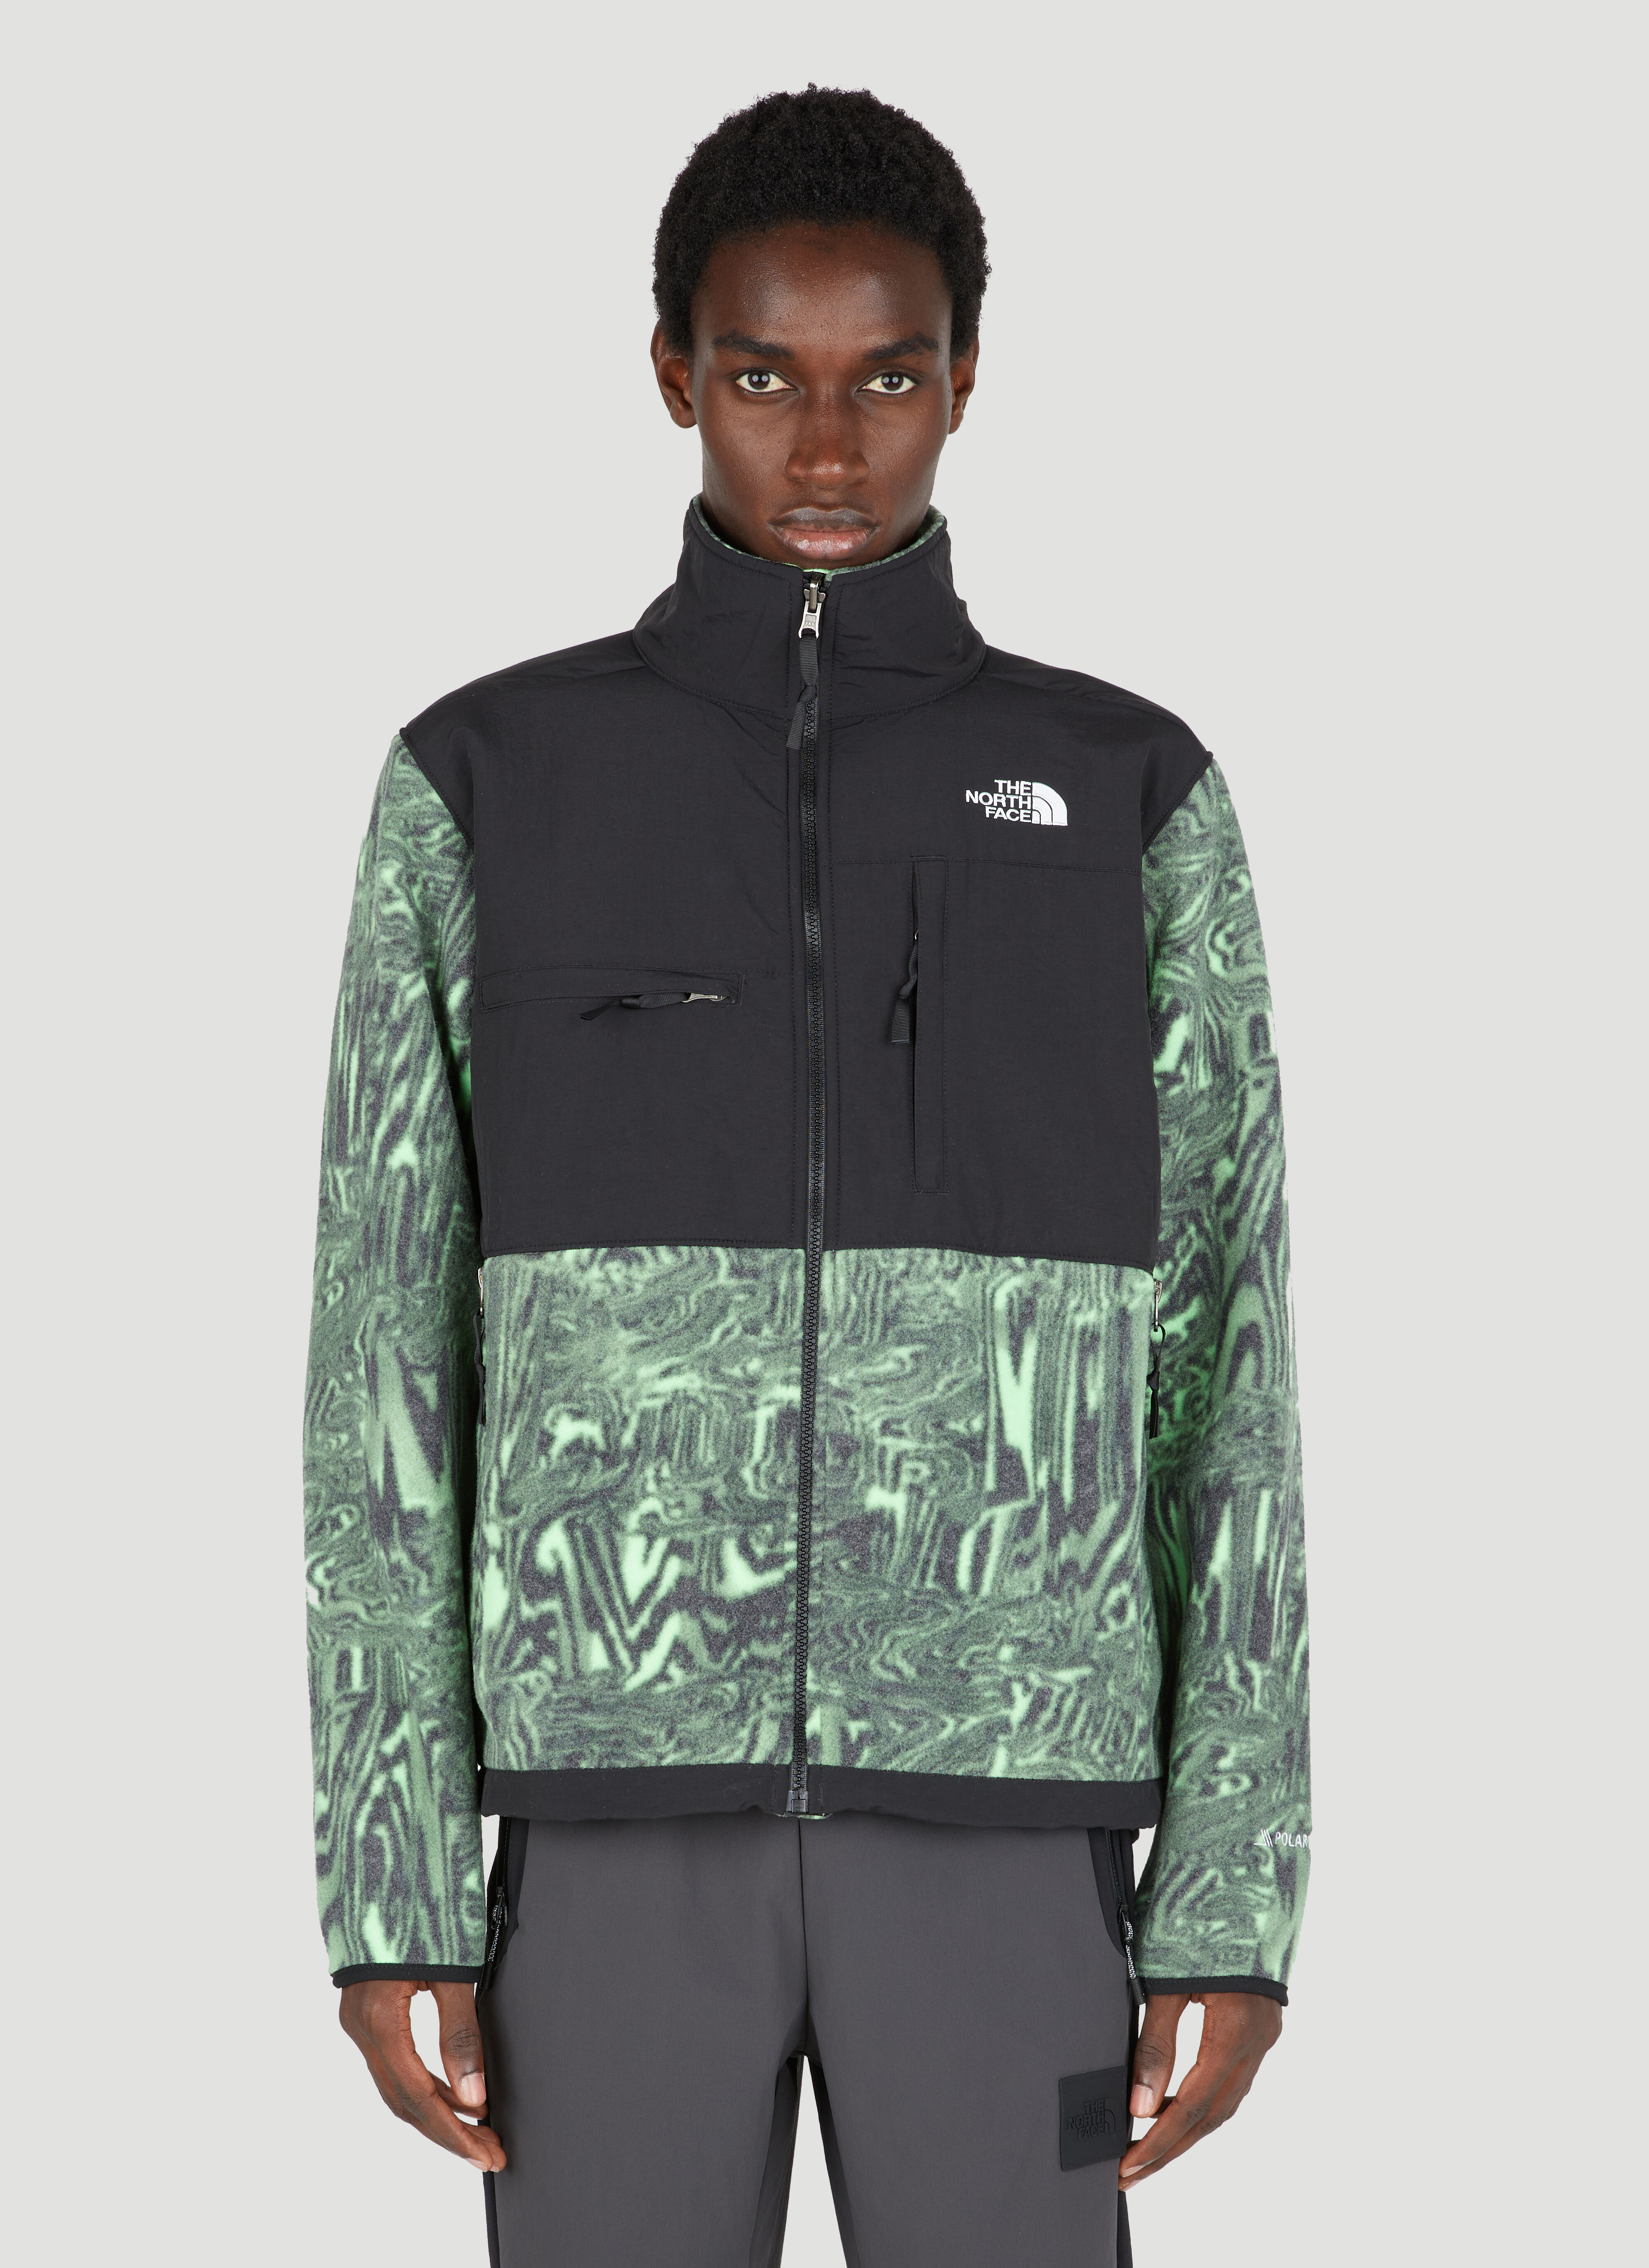 The North Face Denali Jacket with Graphic Print Black tnf0146006